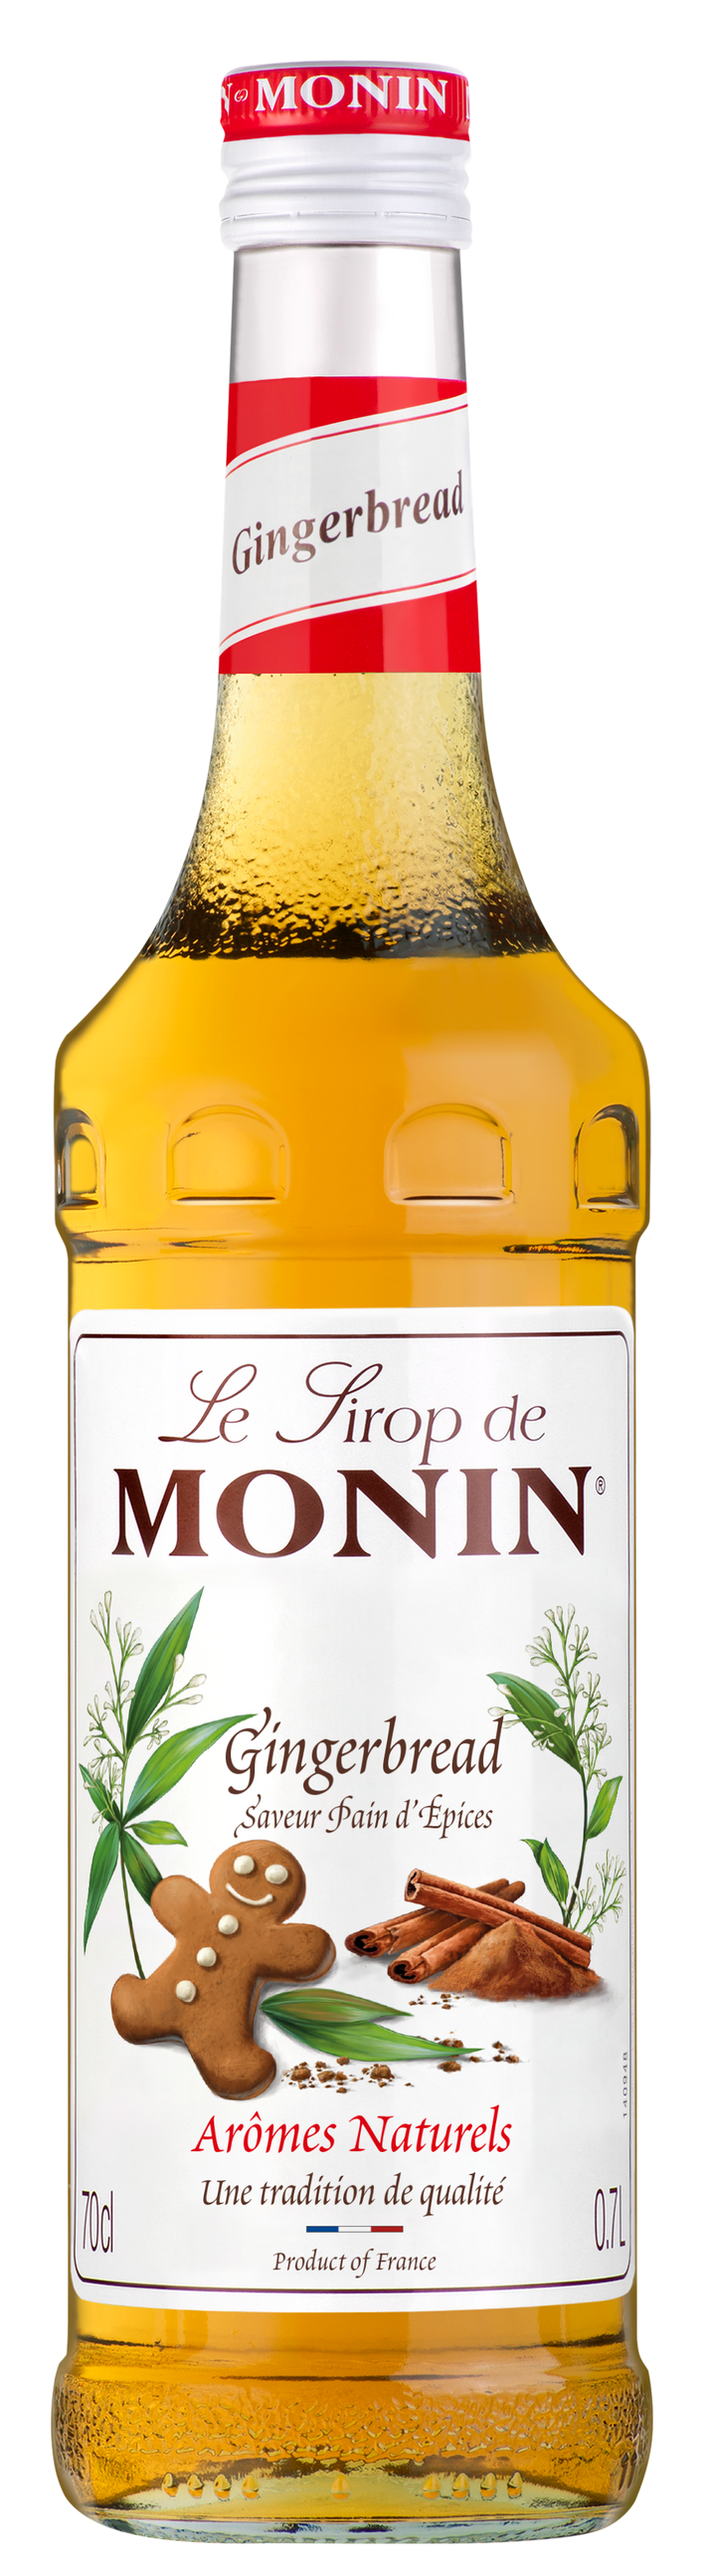 A 70cl bottle of MONIN Gingerbread Syrup, ideal for infusing a festive flavor into your coffees. The label displays "Le Sirop de MONIN" at the top, followed by "Gingerbread" and "Arômes Naturels," featuring an image of a gingerbread cookie and spices with golden brown syrup inside.